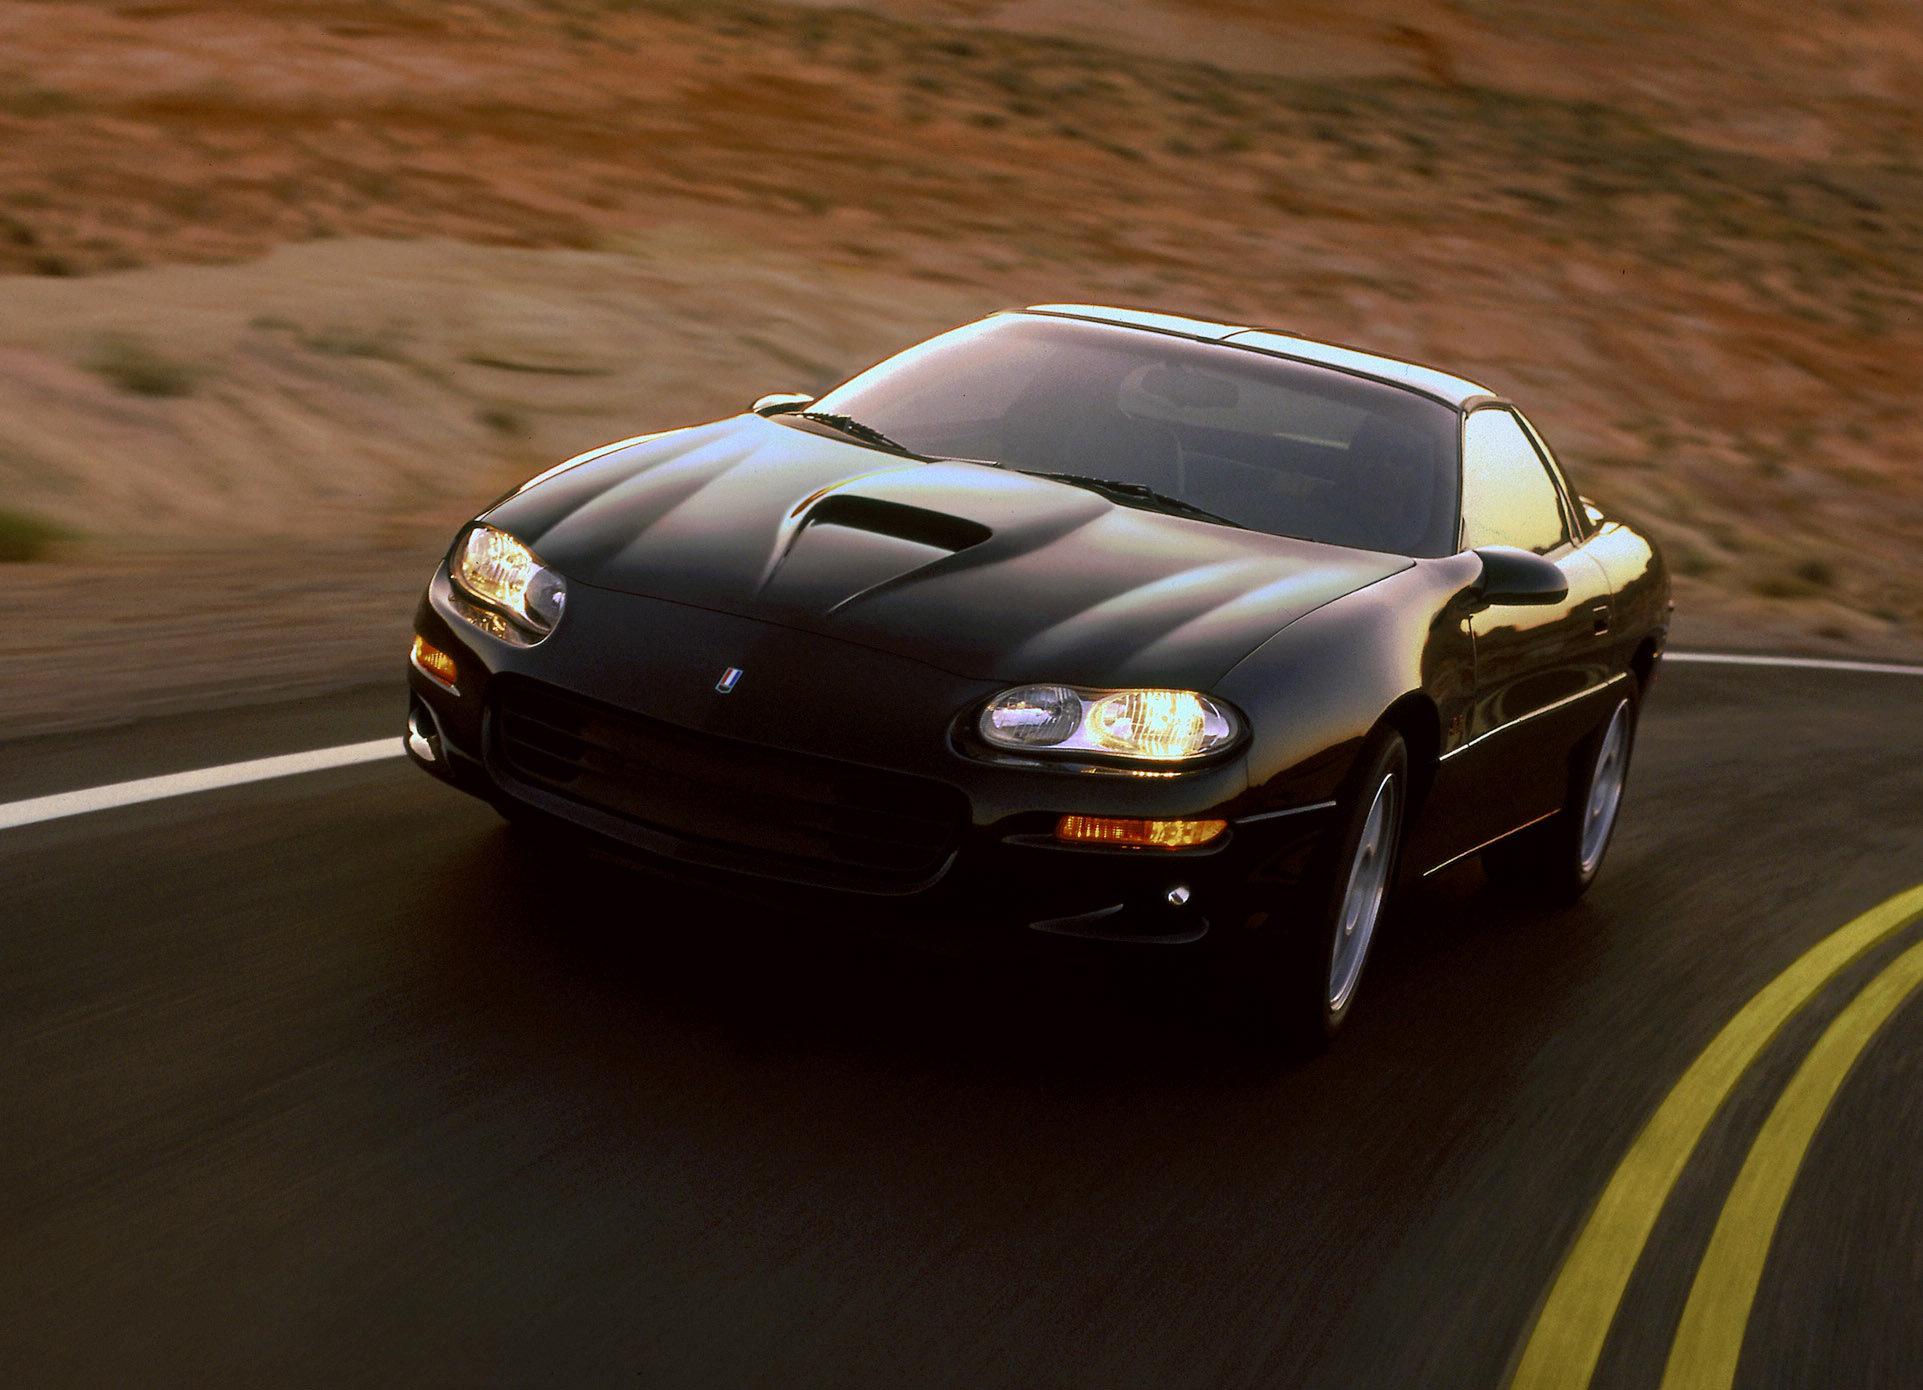 The 1998 Chevrolet Camaro SS in black shot in motion from the front 3/4 angle